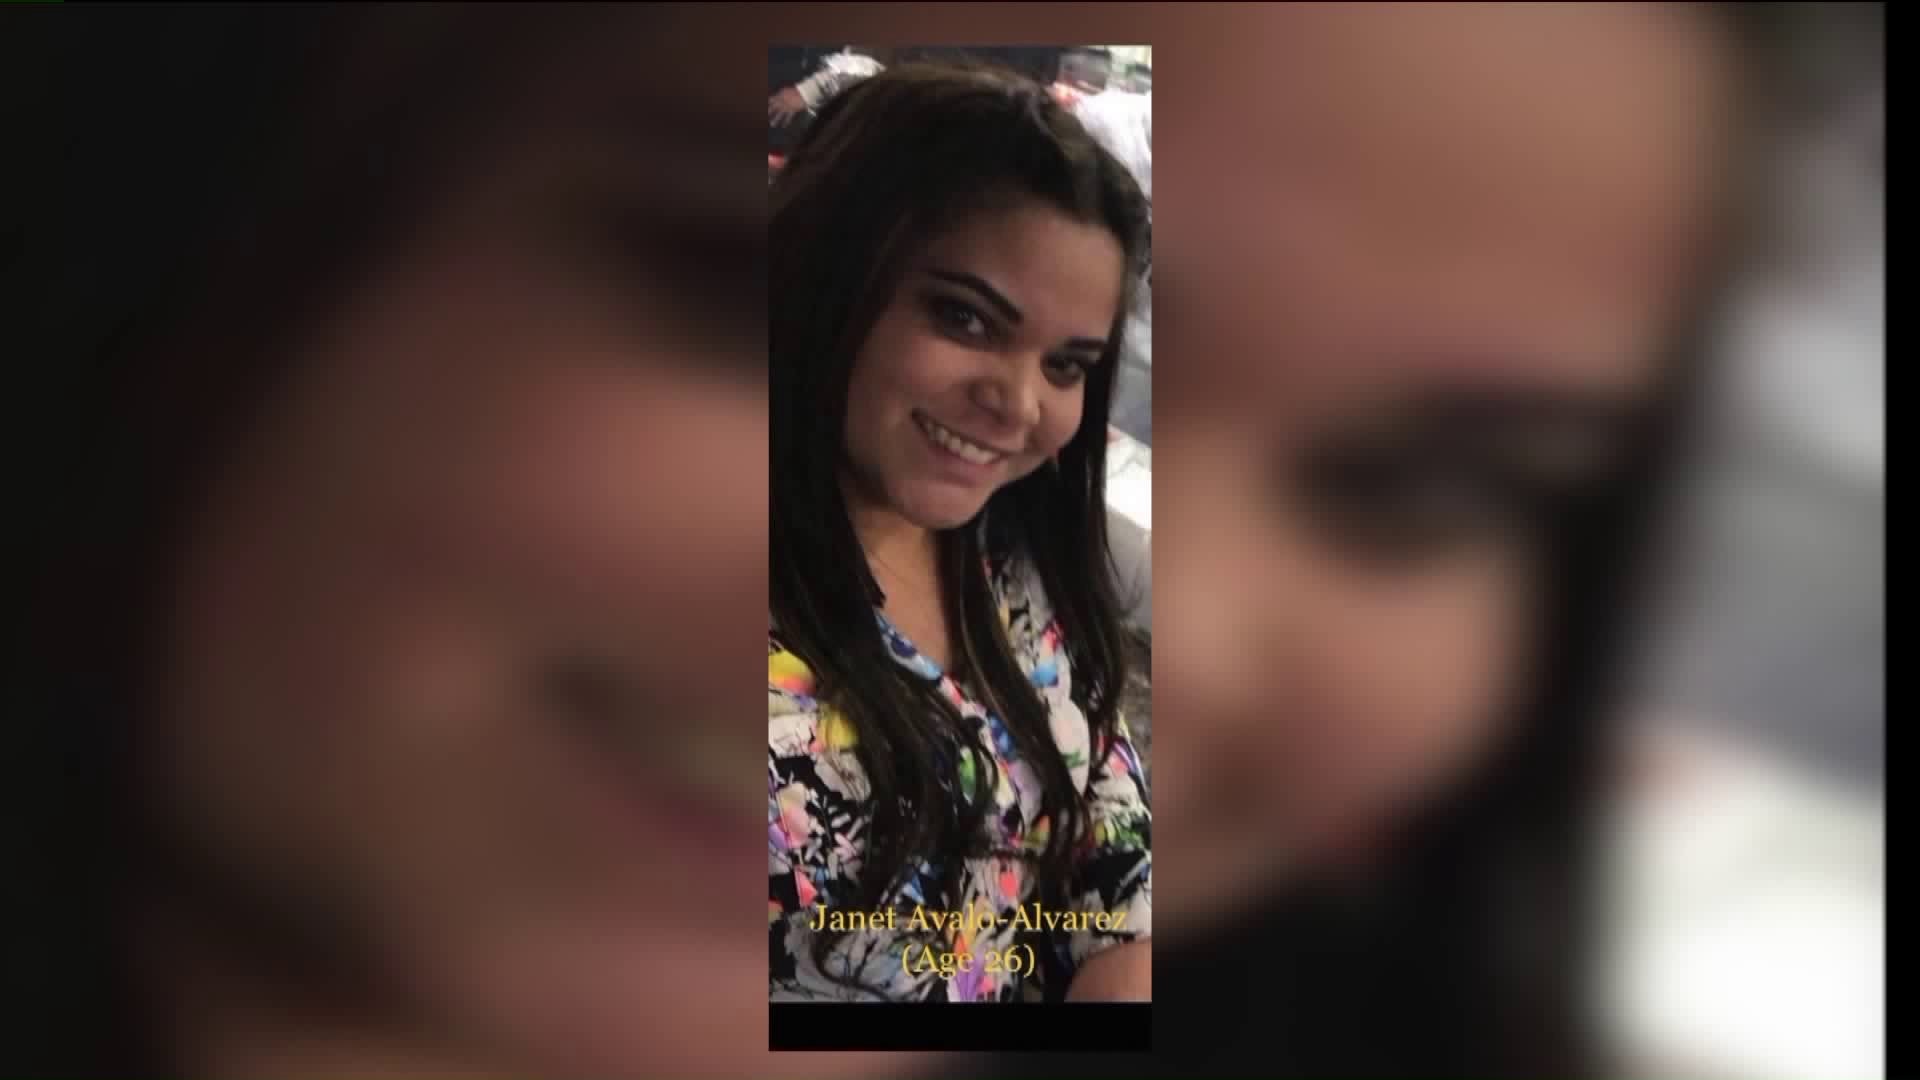 Family, friends worry about missing Waterbury woman